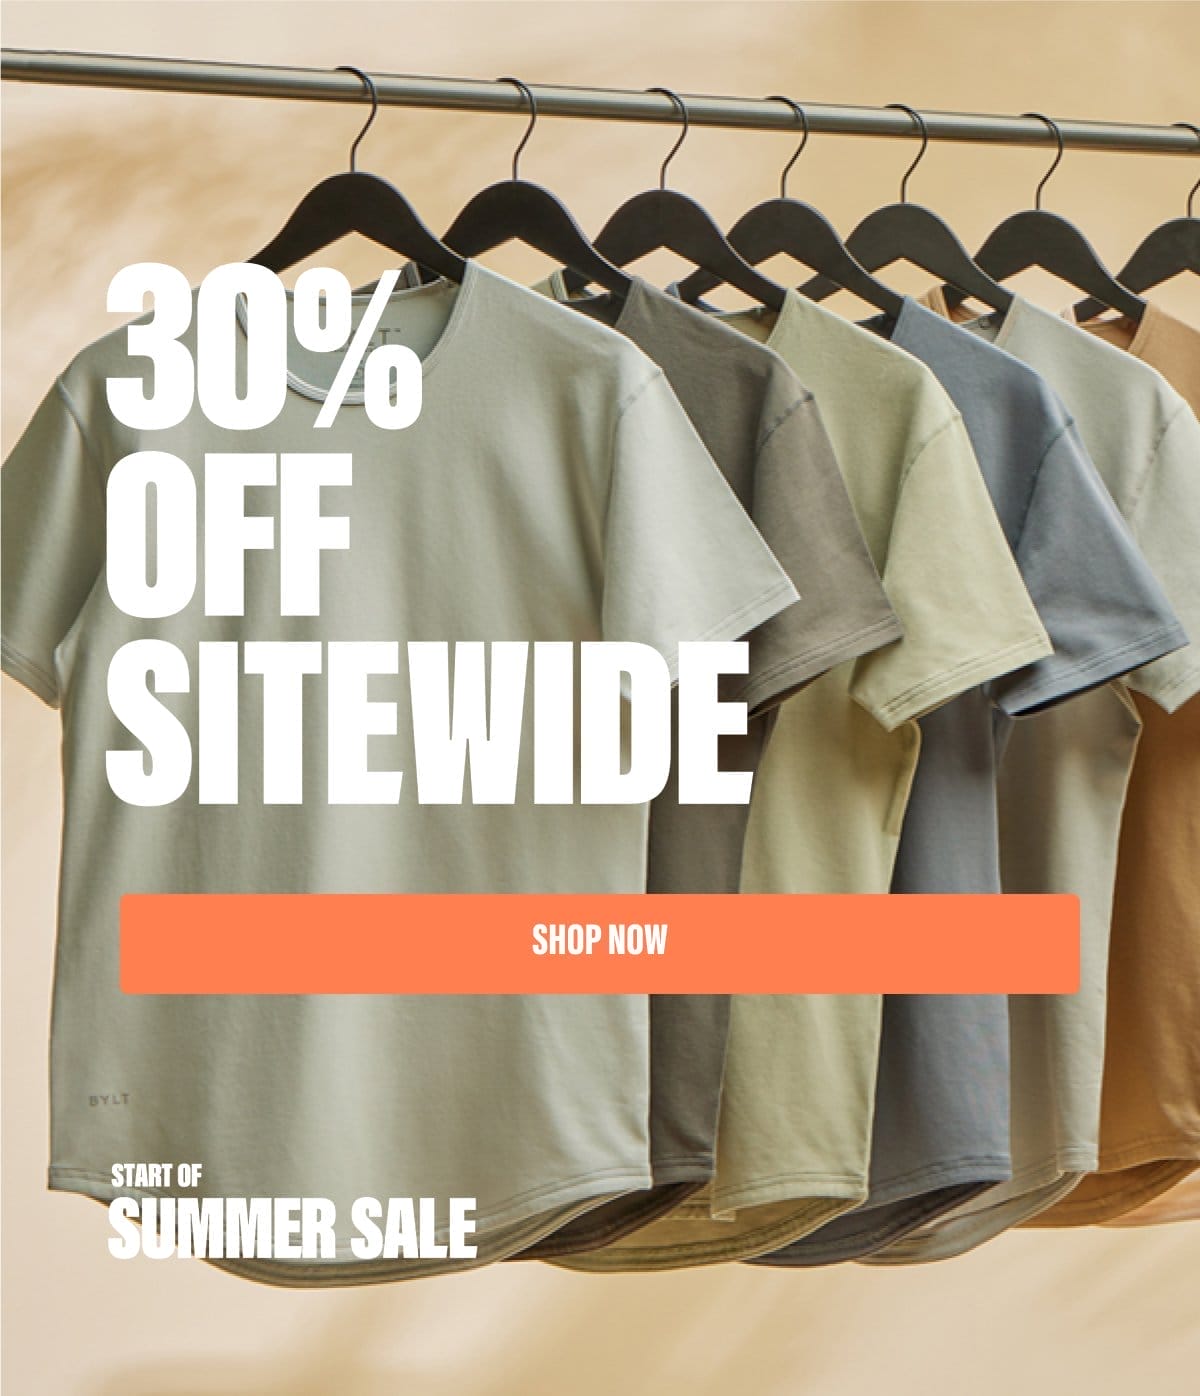 Start of Summer Sale - LUX Collection